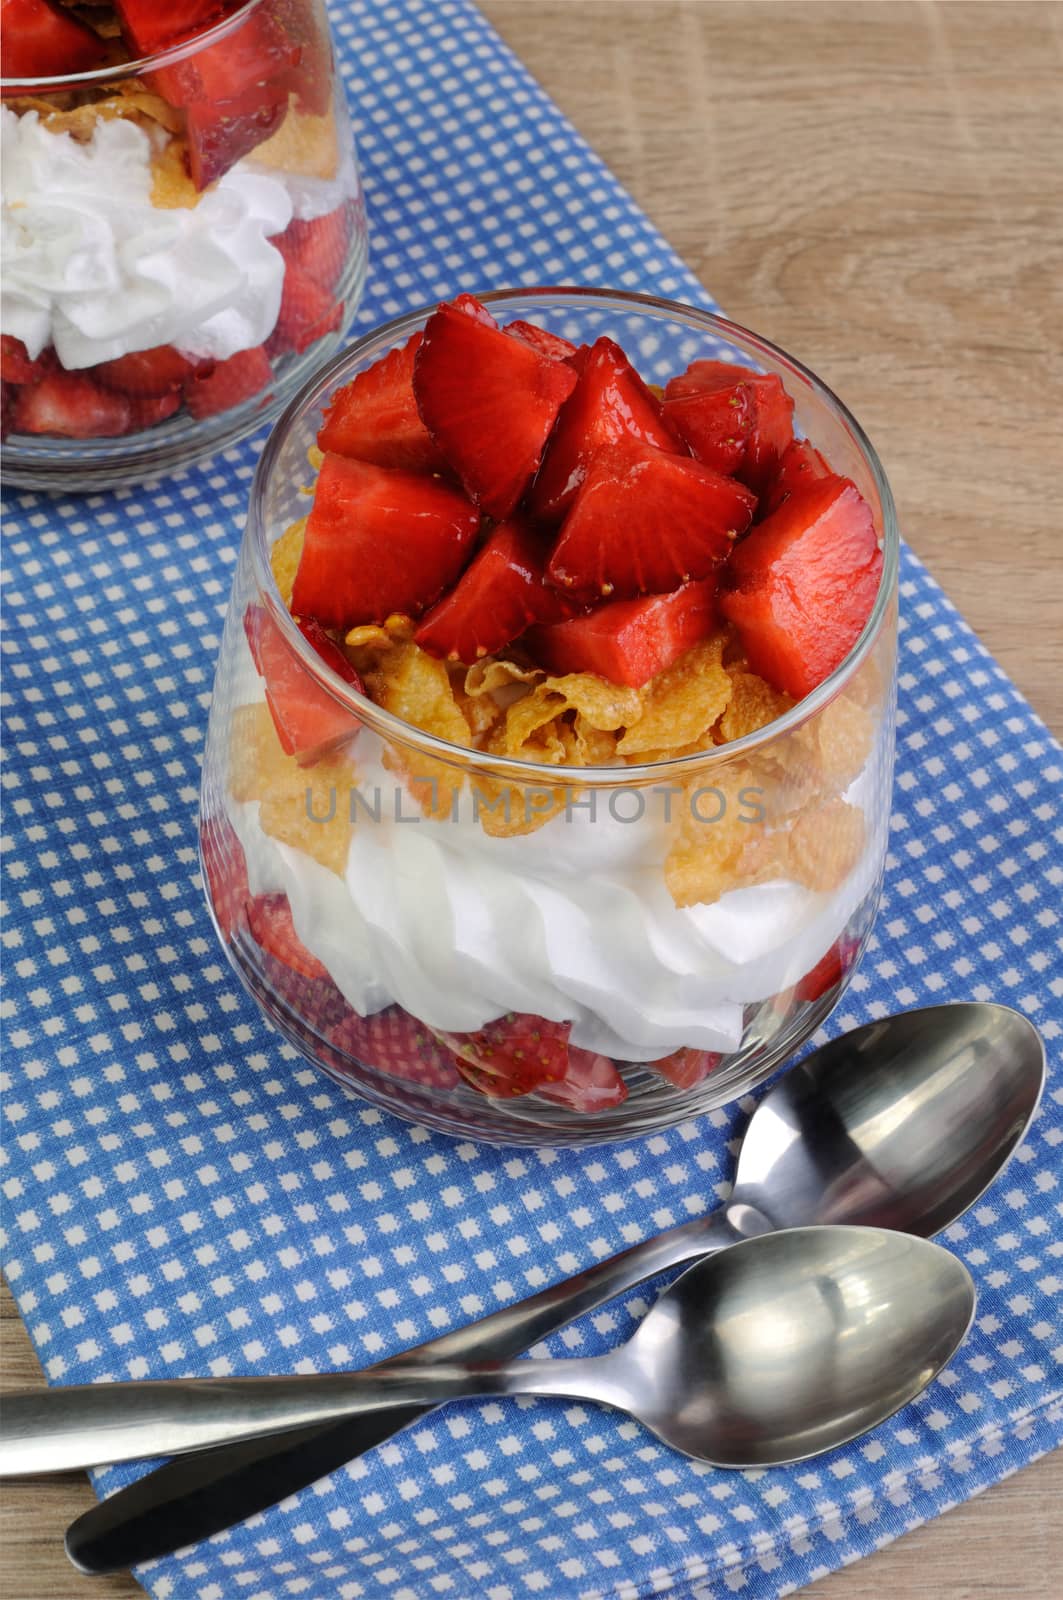 Parfait with strawberries by Apolonia